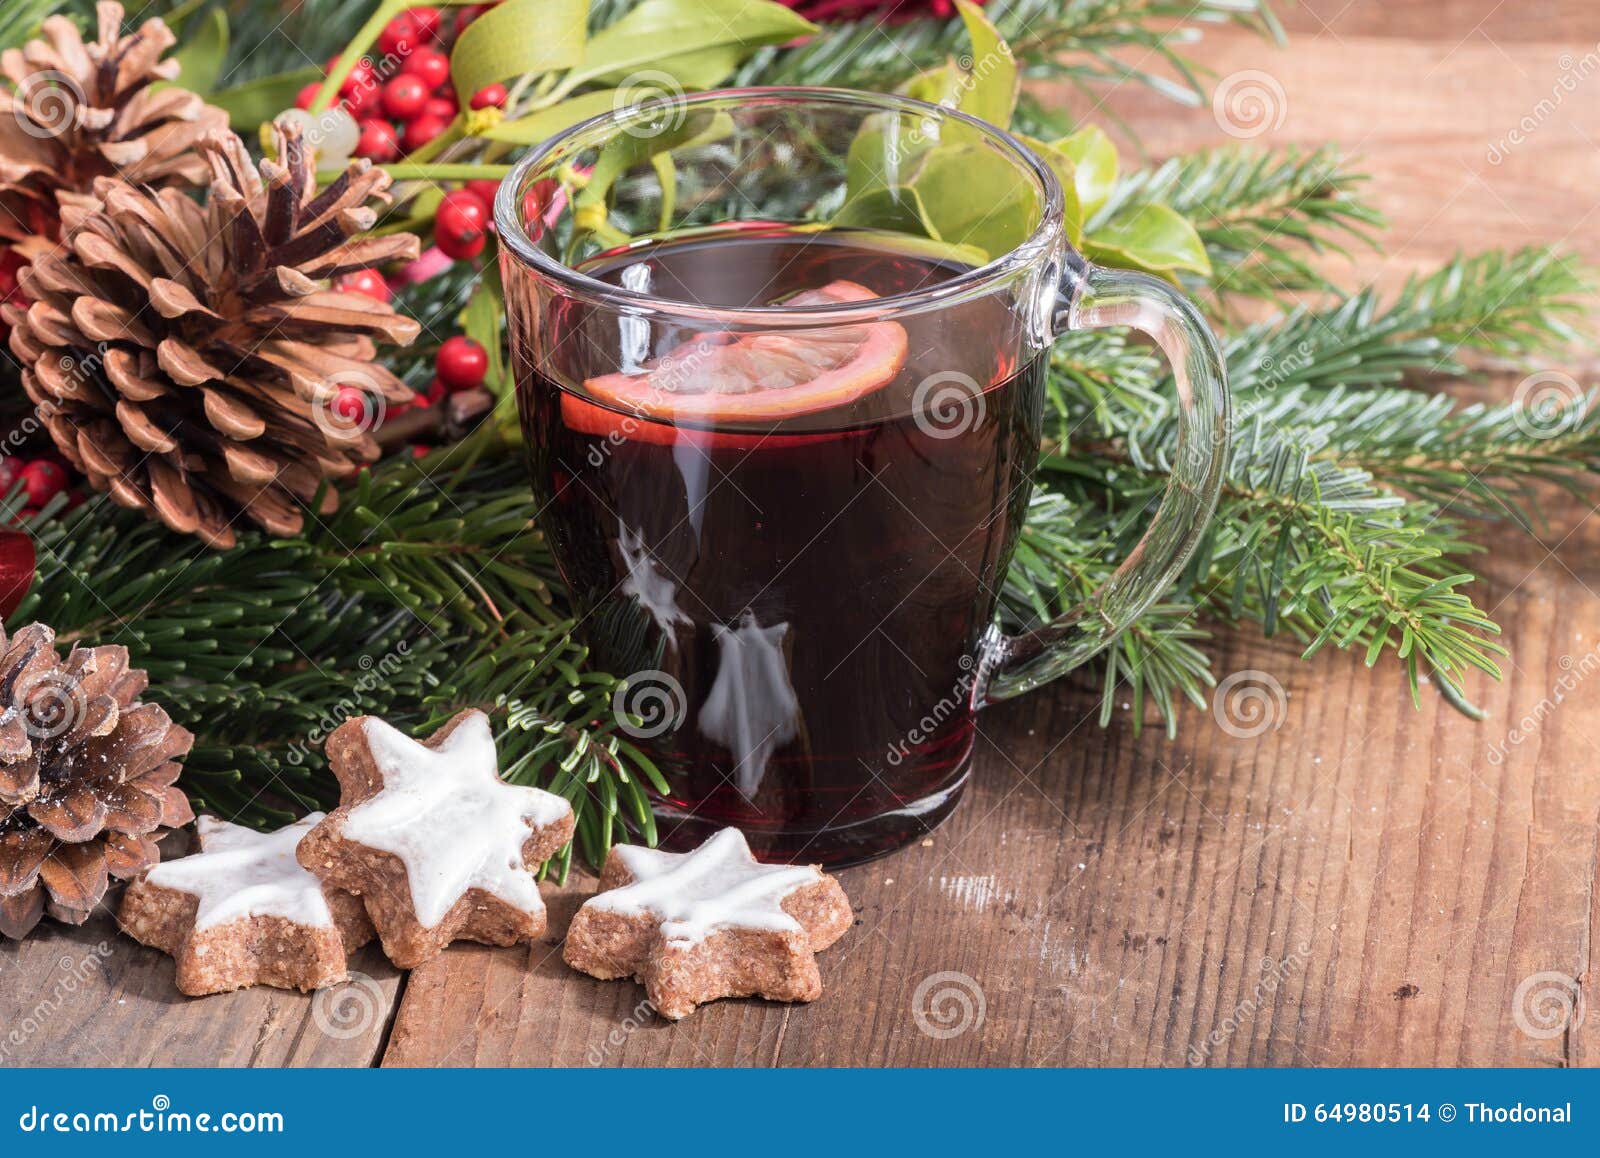 Hot red wine drink stock photo. Image of warm, christmas - 64980514